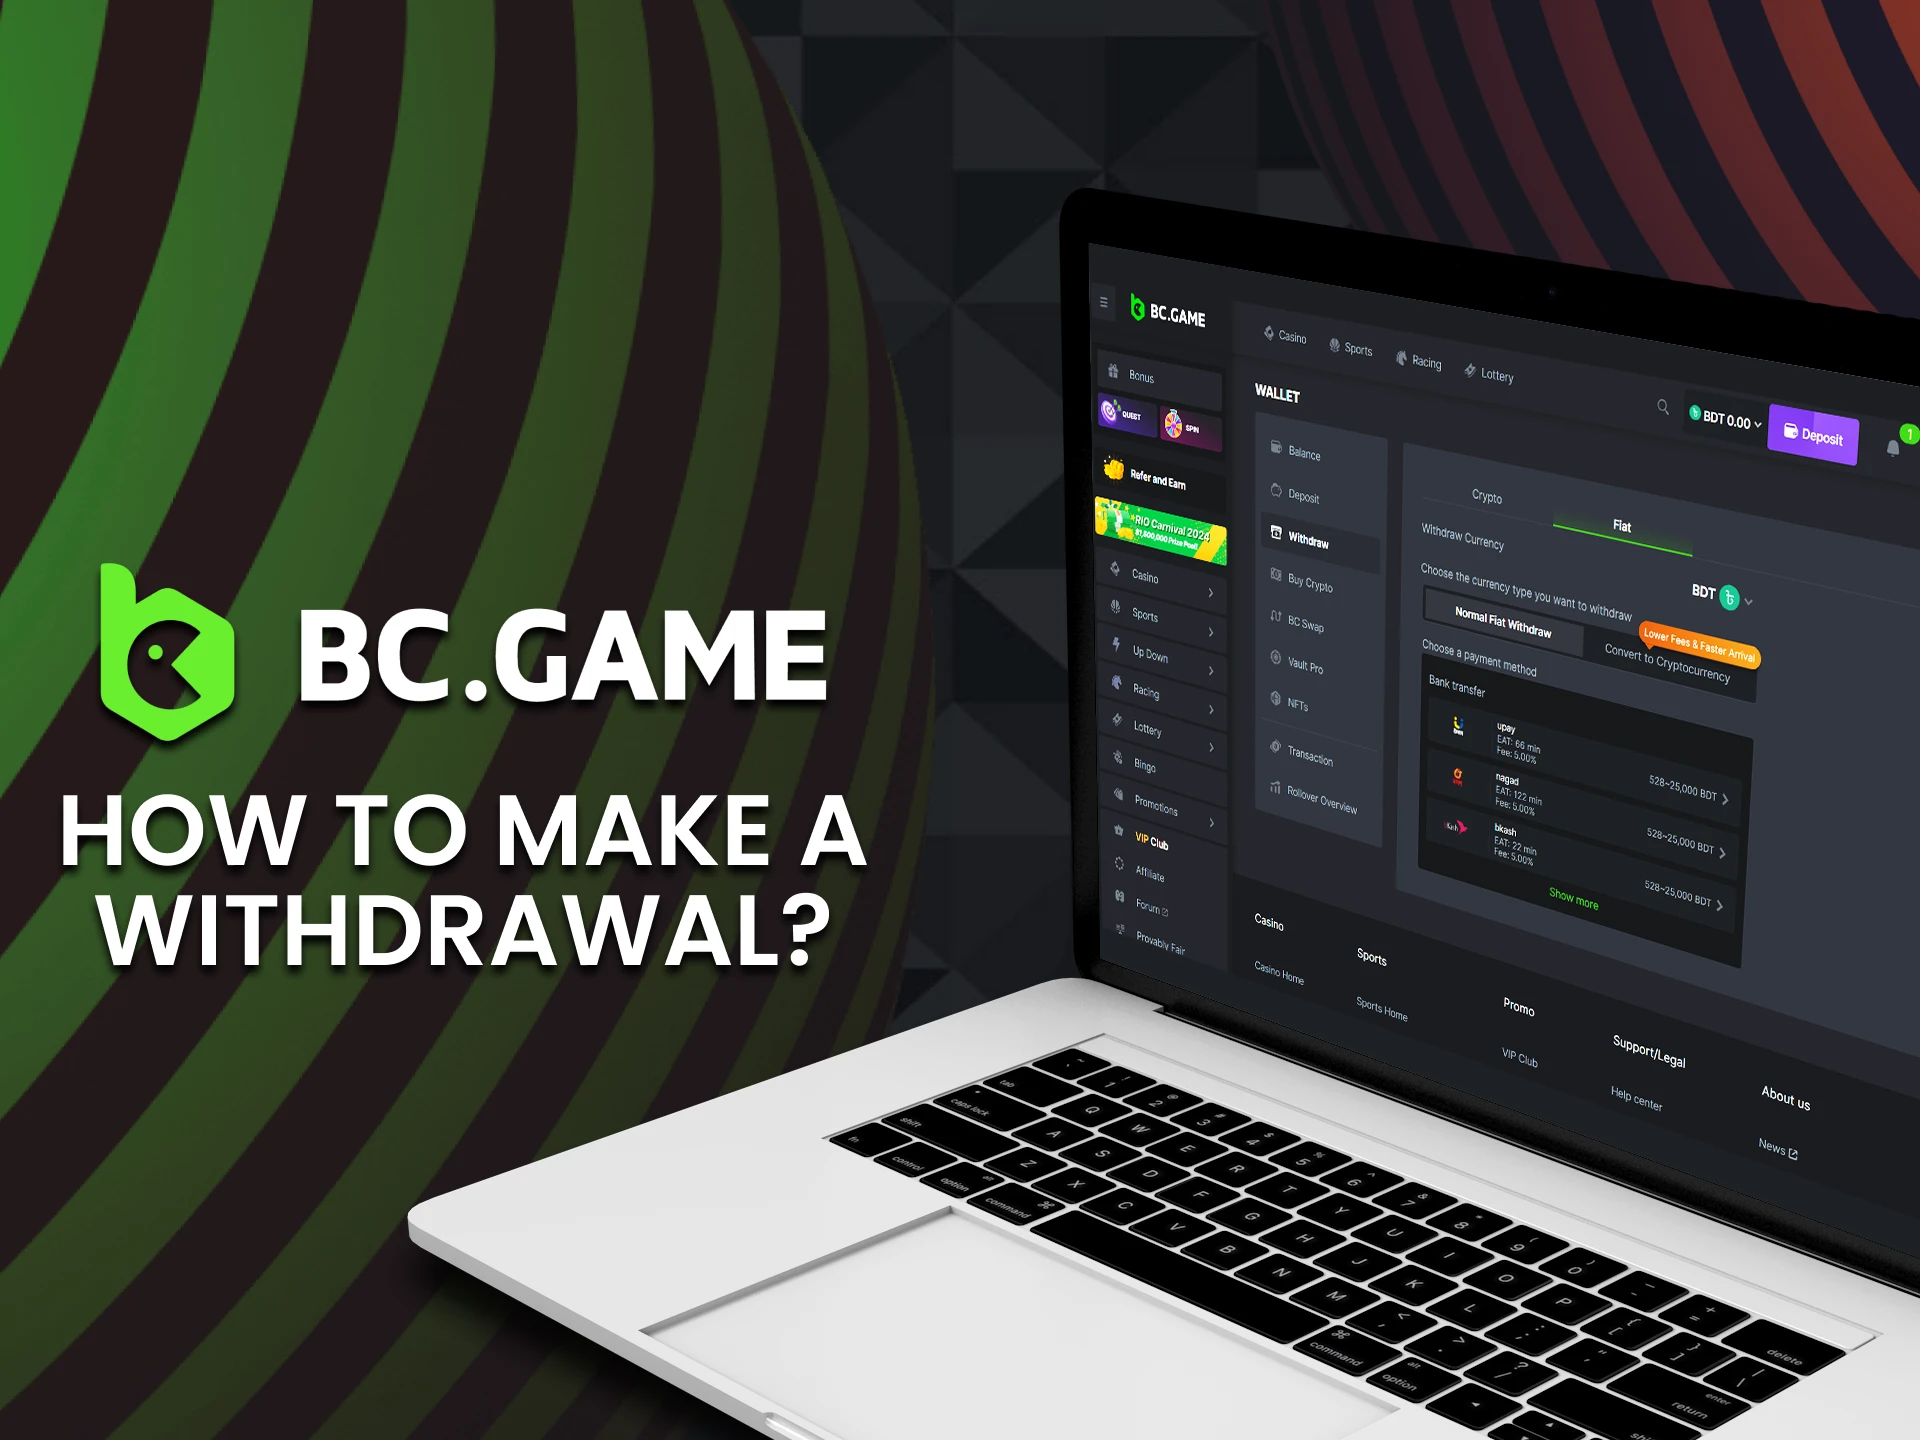 Withdraw money from BC Game in 5 simple steps.